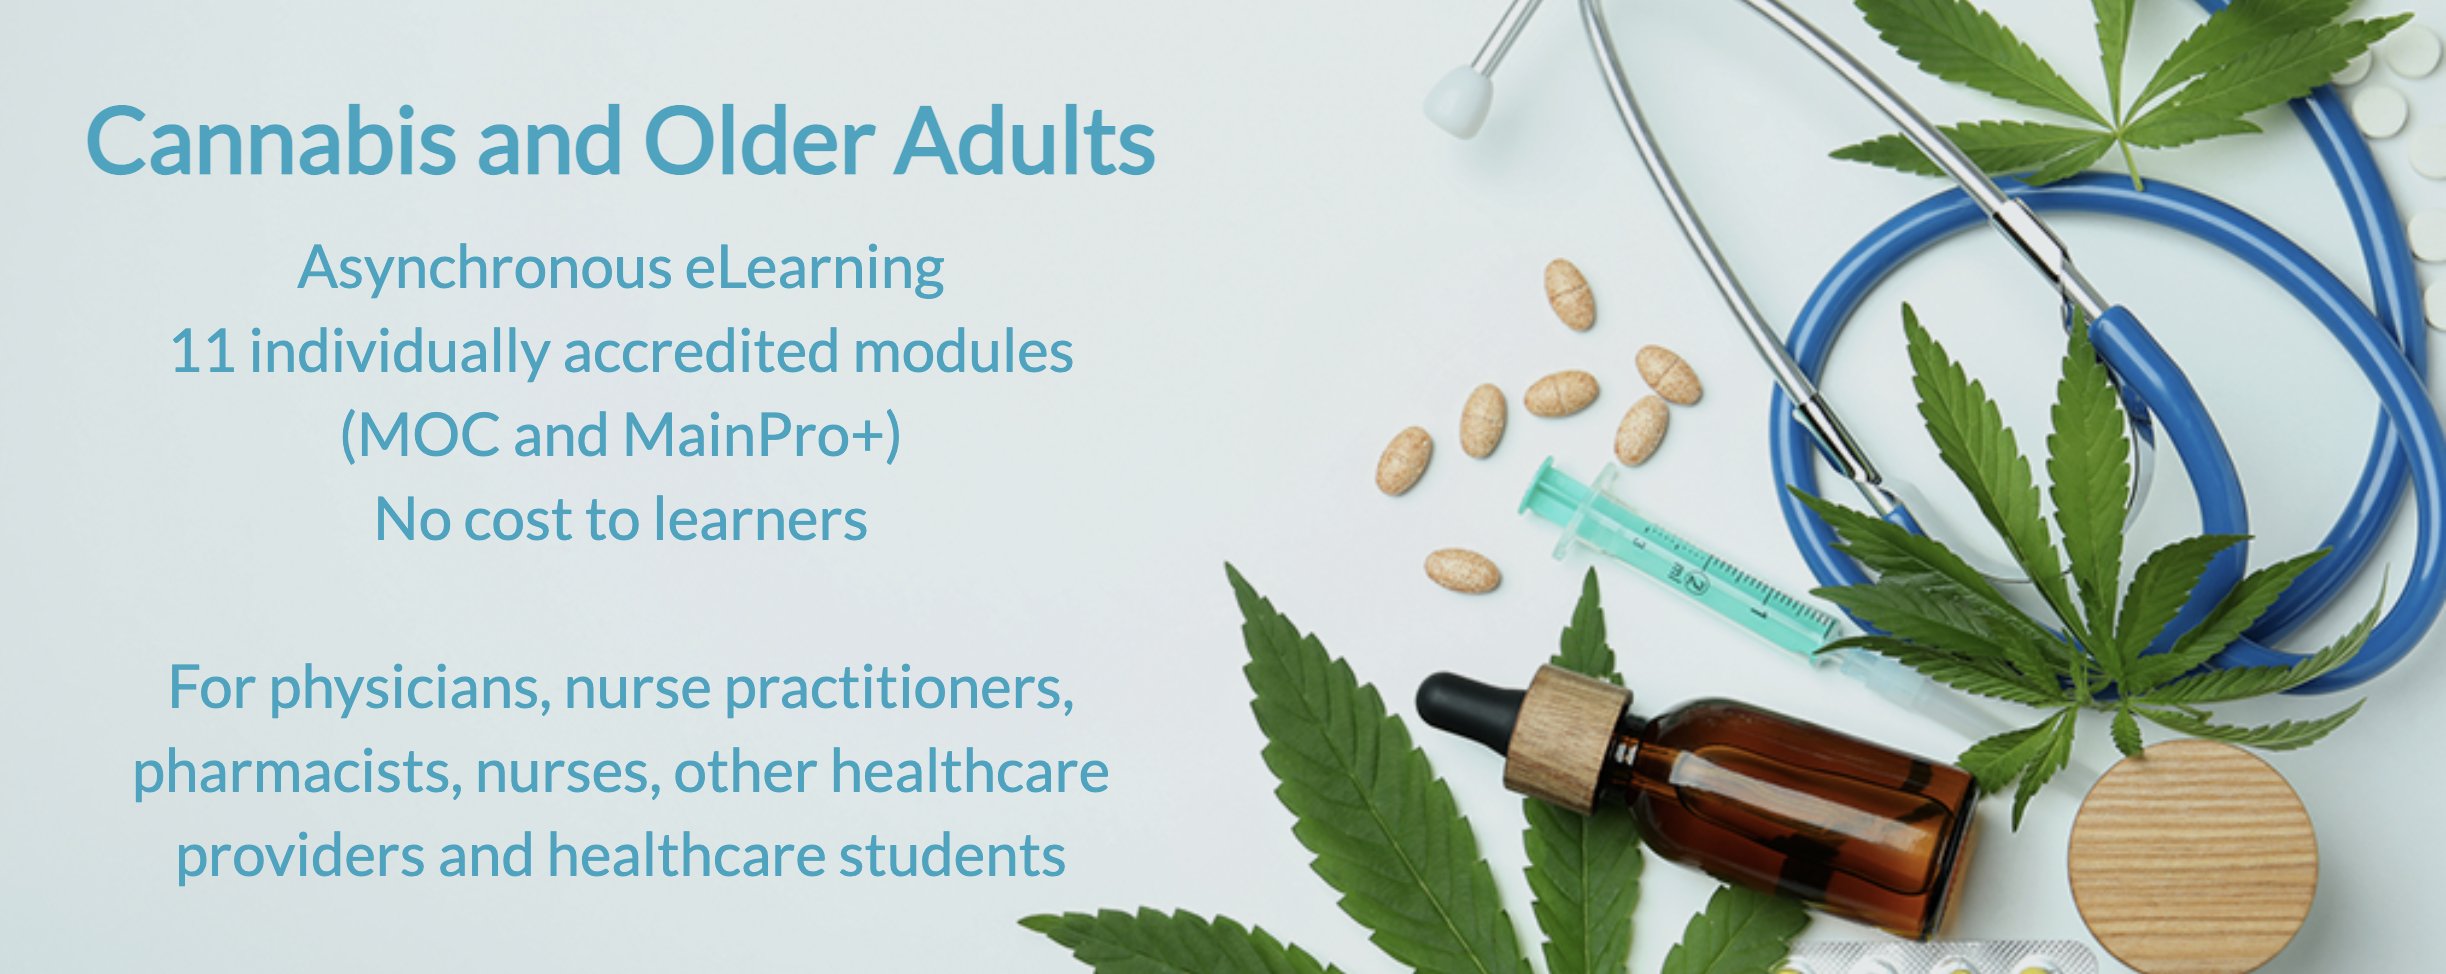 Cannabis and Older Adults eLearning Modules by the CCSMH